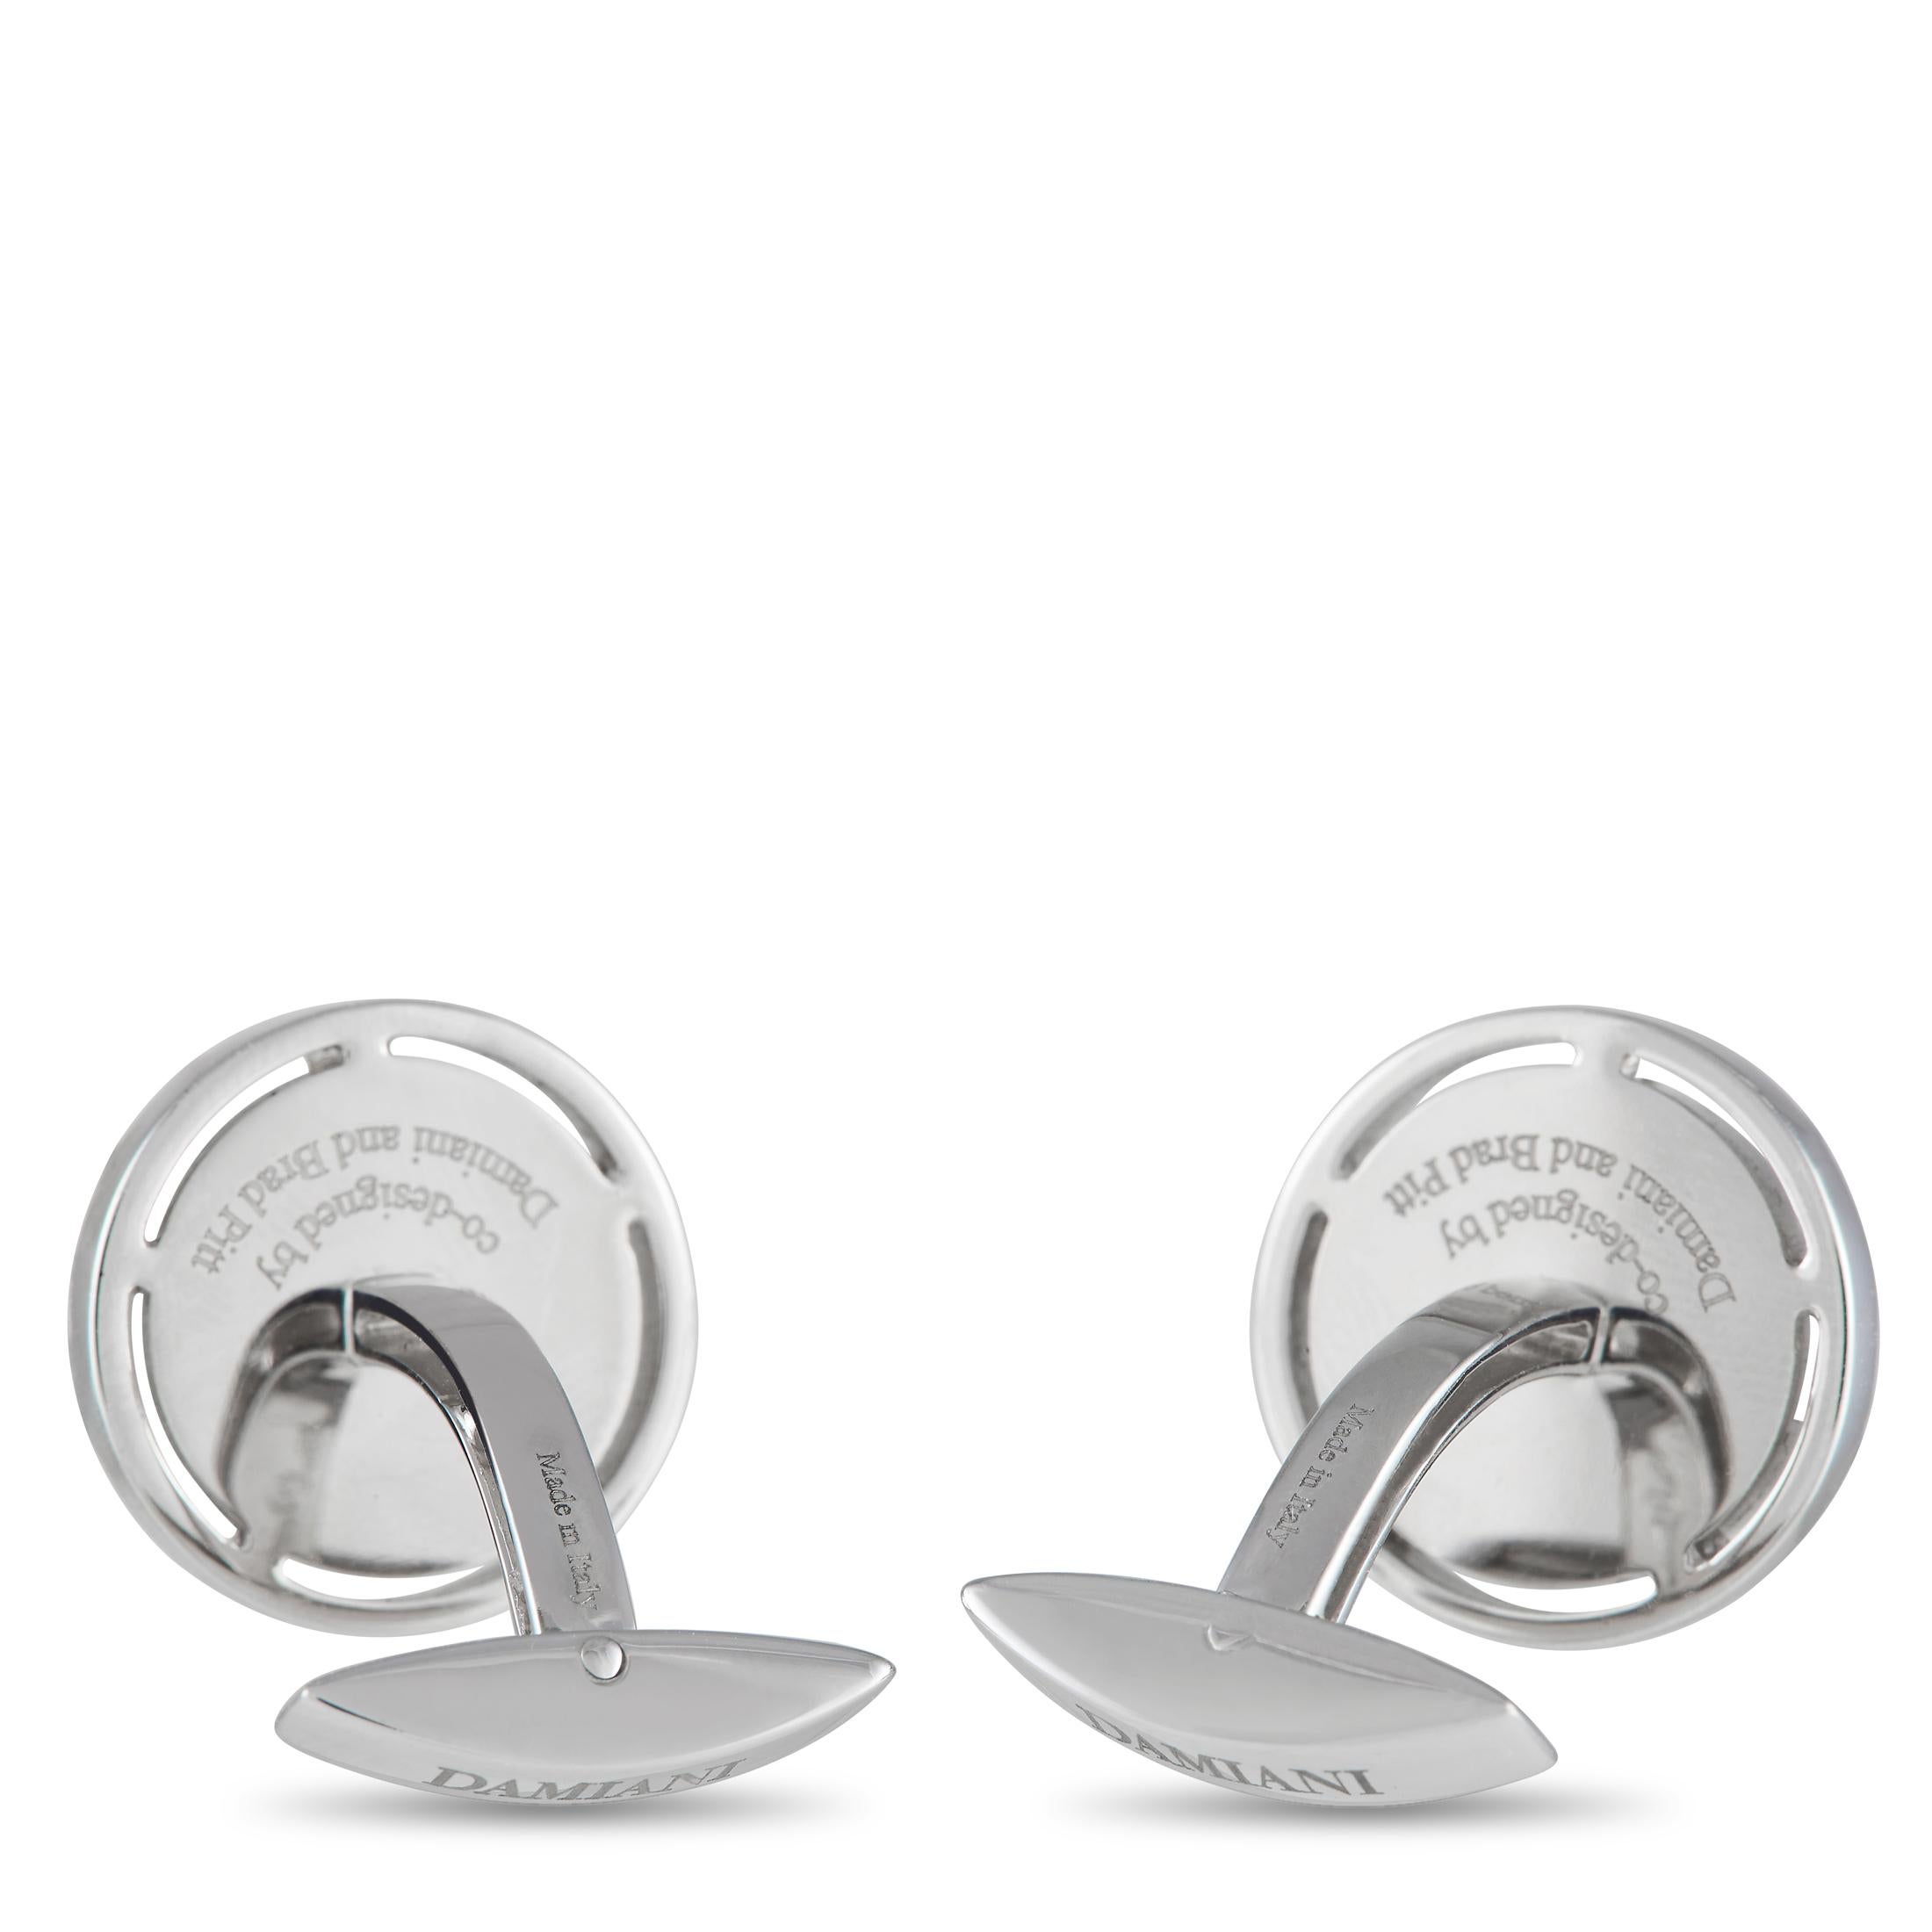 Designed by Damiani in collaboration with Brad Pitt, these cufflinks have a clean, sophisticated look that will never go out of style. A captivating onyx stone sits at the center of the sleek 18K white gold setting, which measures 0.65” round.